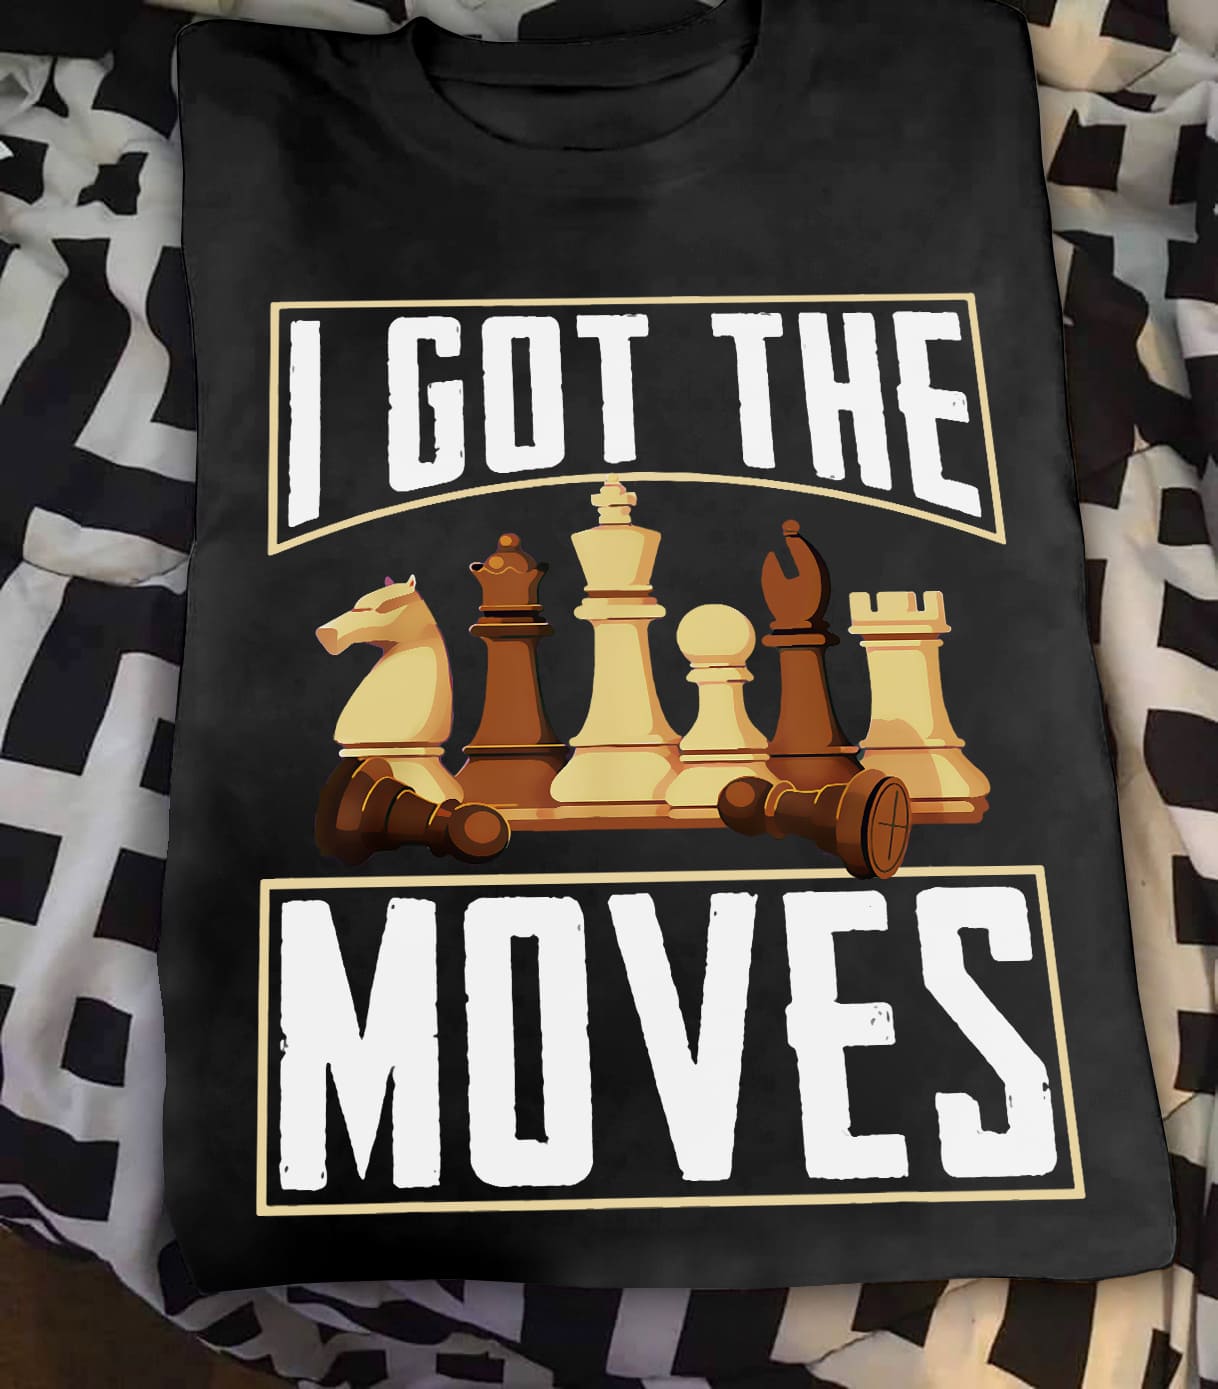 I got the moves - Chess moves, love playing chess